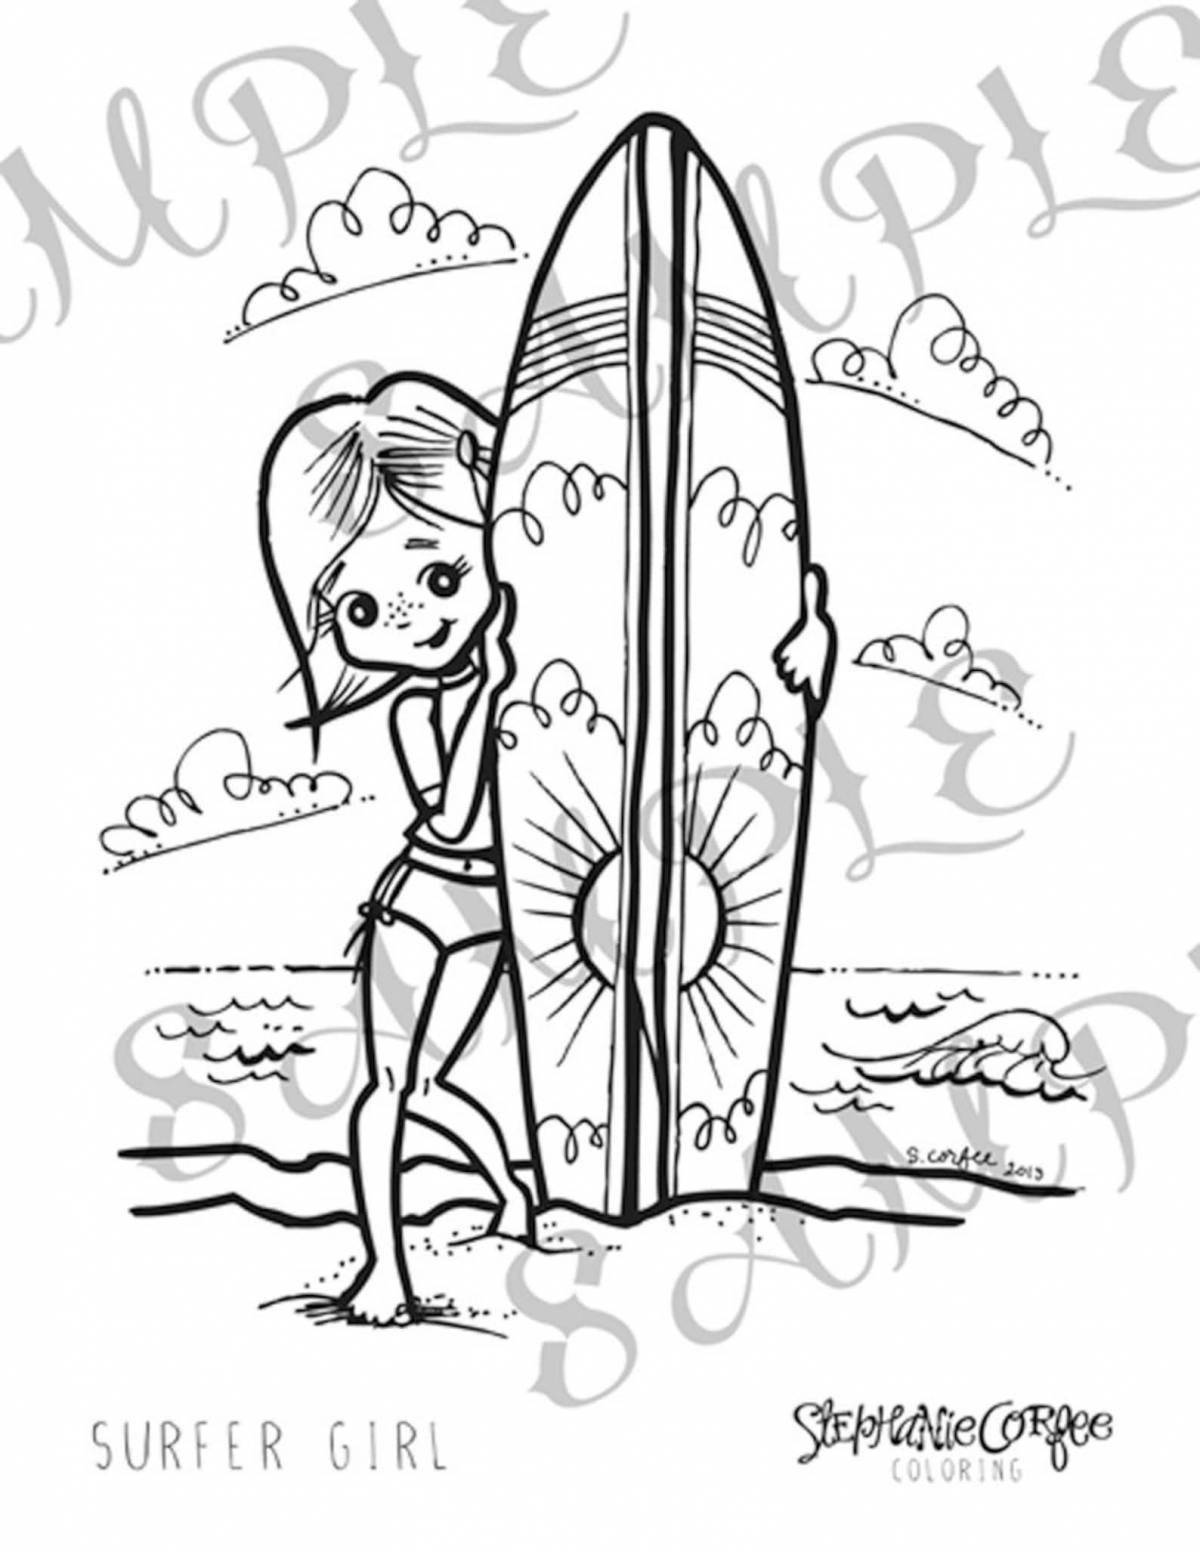 Exciting surf coloring book